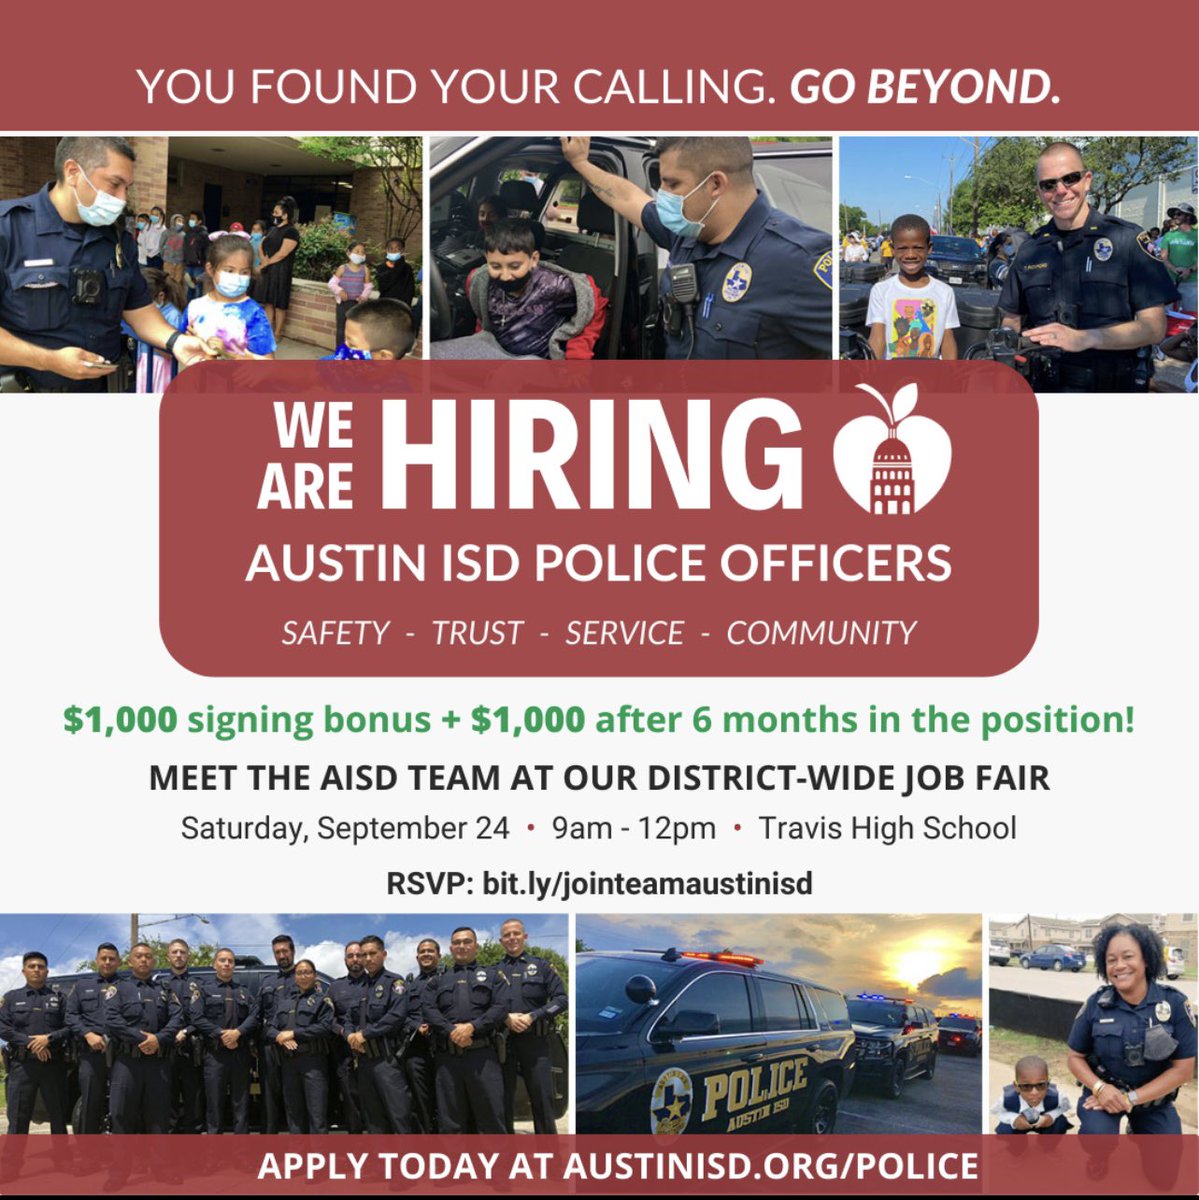 Come see us tomorrow @TravisRebels from 9-12!! We would love for you to join our team! @AustinISD @anthonymays5 @WeAreAISD #AISDgamechanger